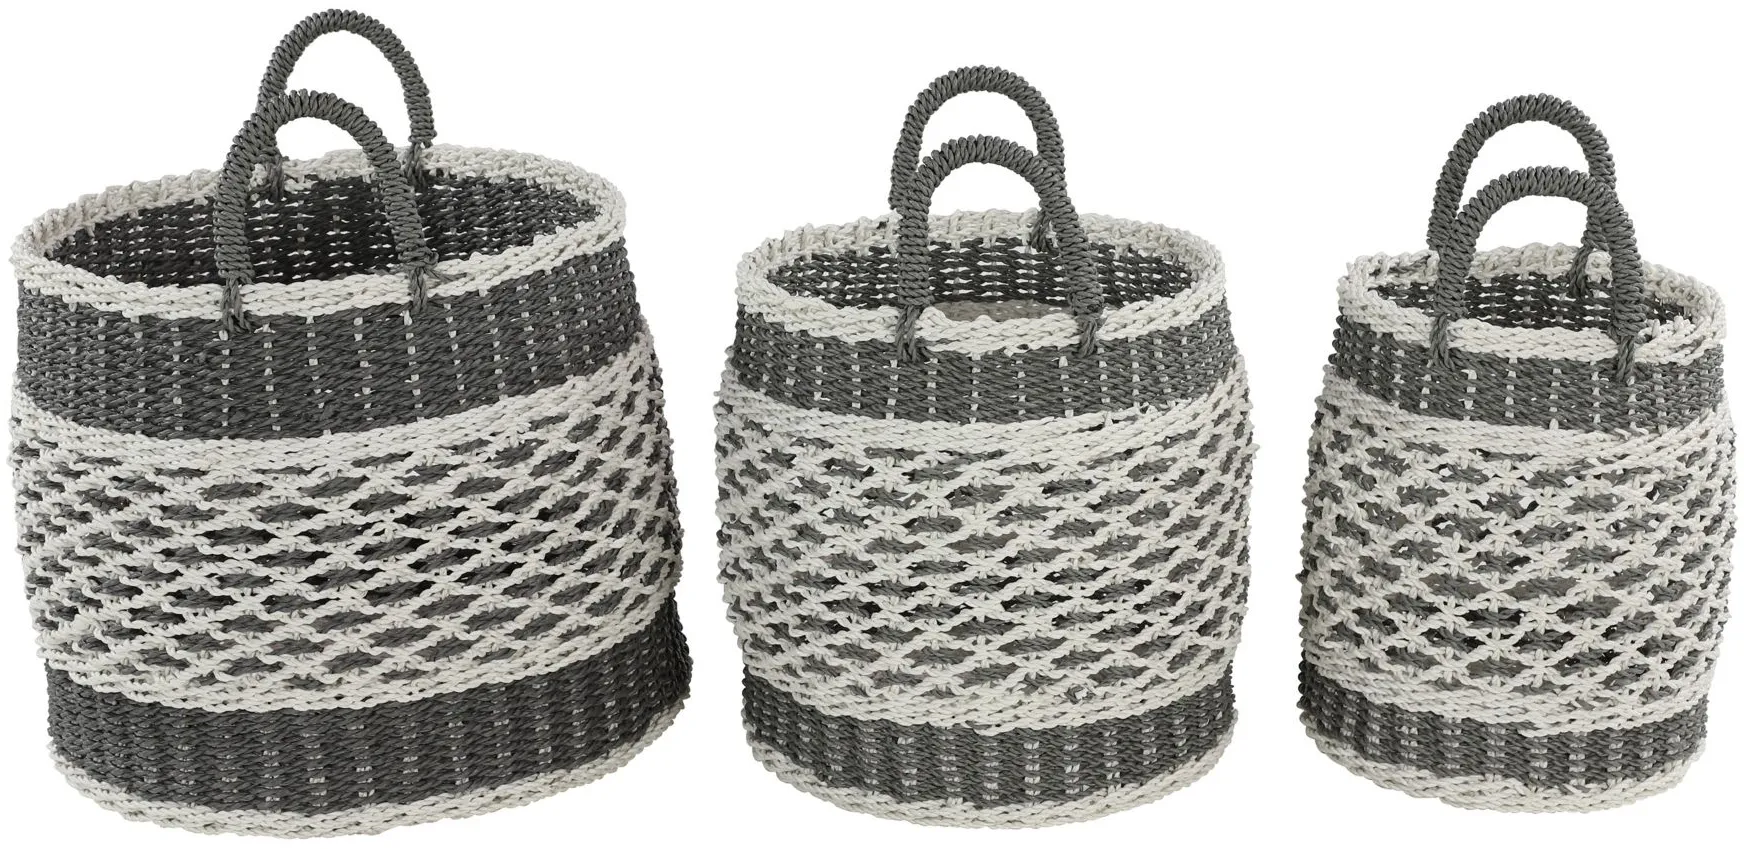 Ivy Collection Storage Baskets - Set of 3 in Gray by UMA Enterprises